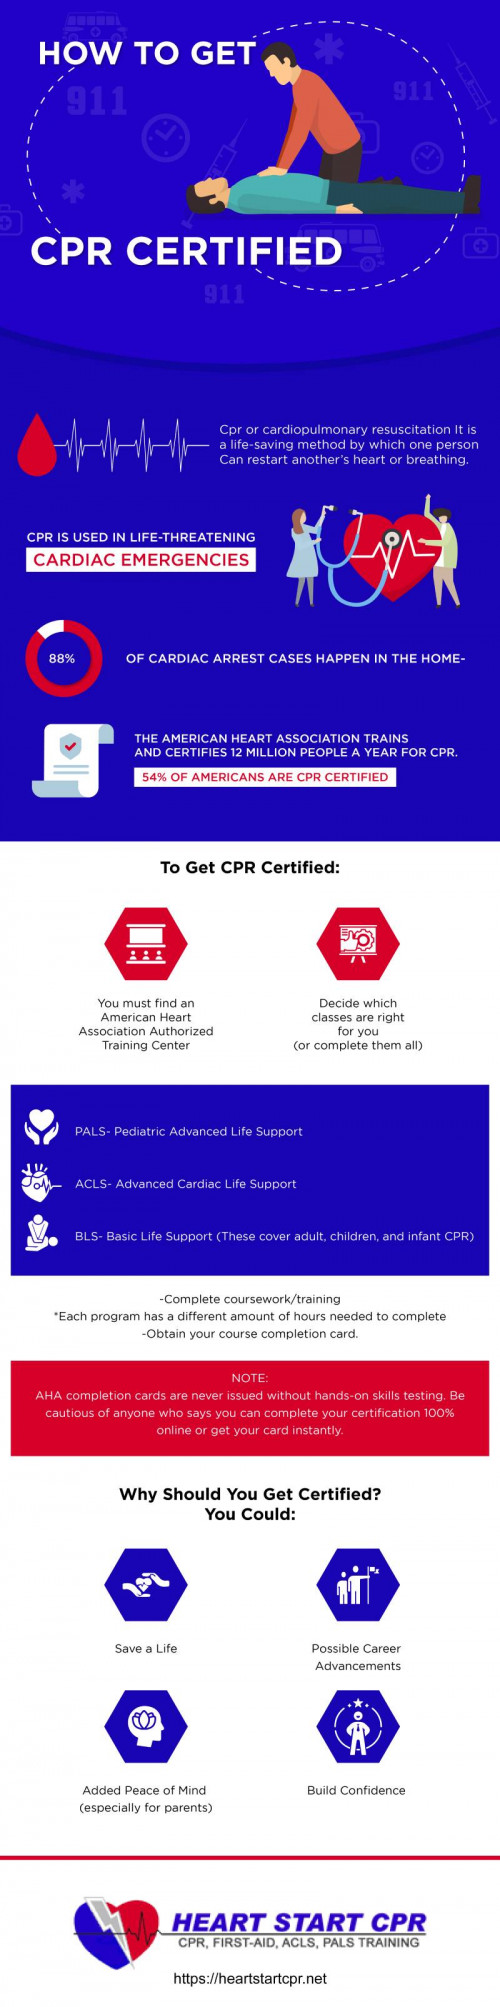 How To Get CPR Certified Infographic by Heart Start CPR